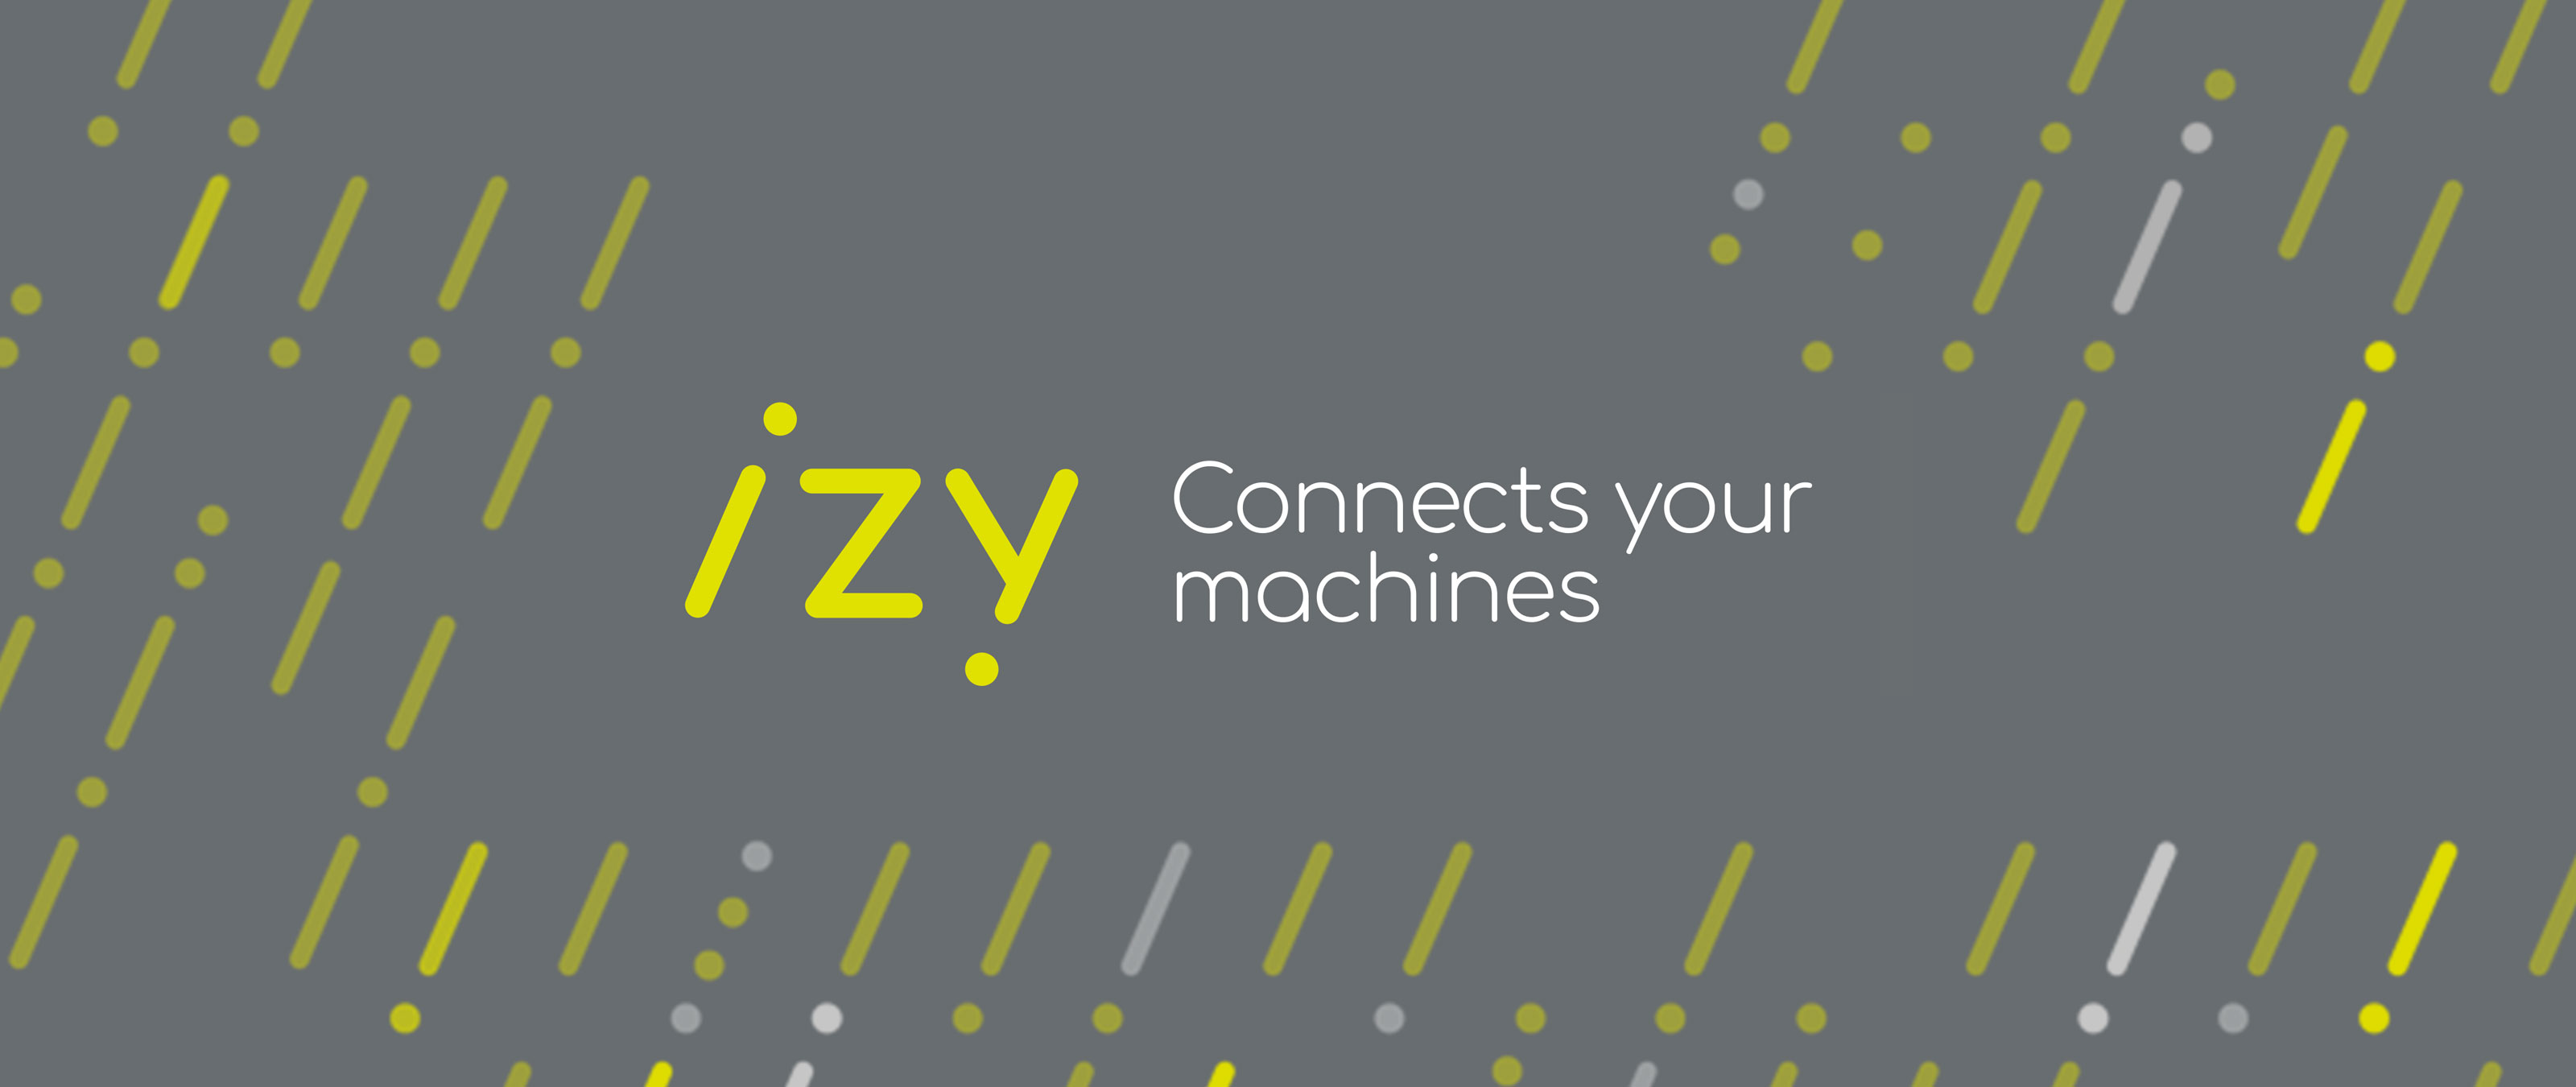 IZY connects your machines